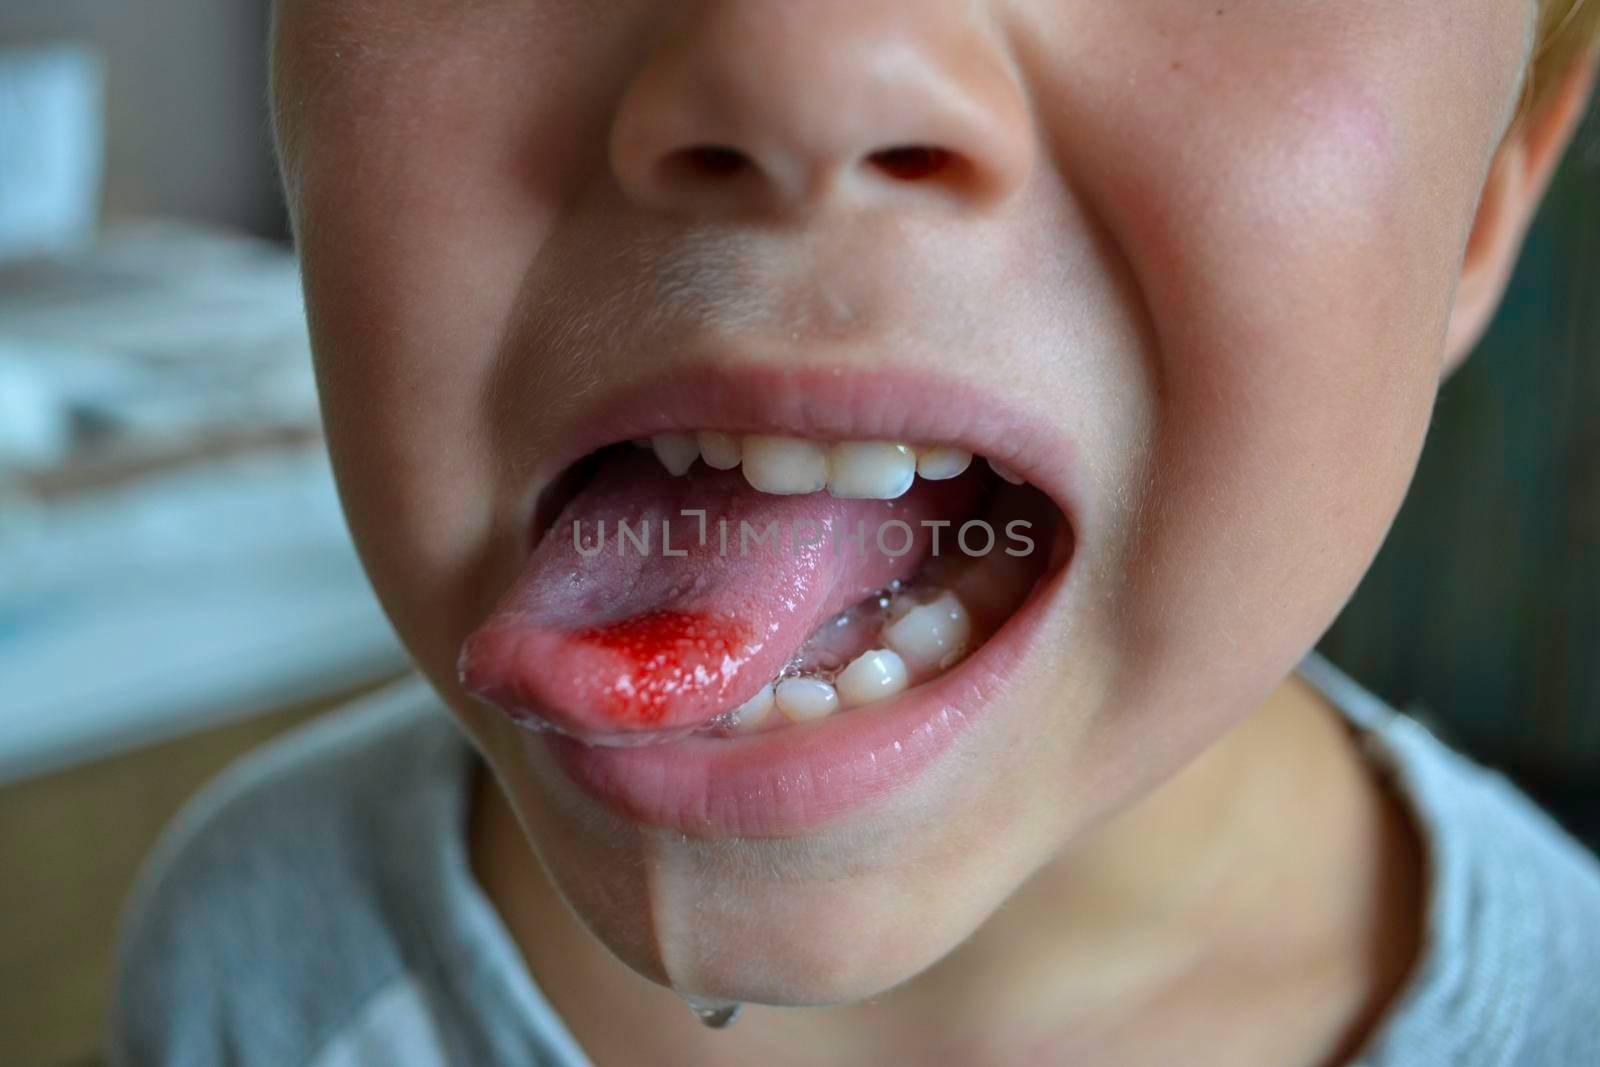 Close-up of lips, tongue, protrusion of blood. Child's bitten tongue. by milastokerpro